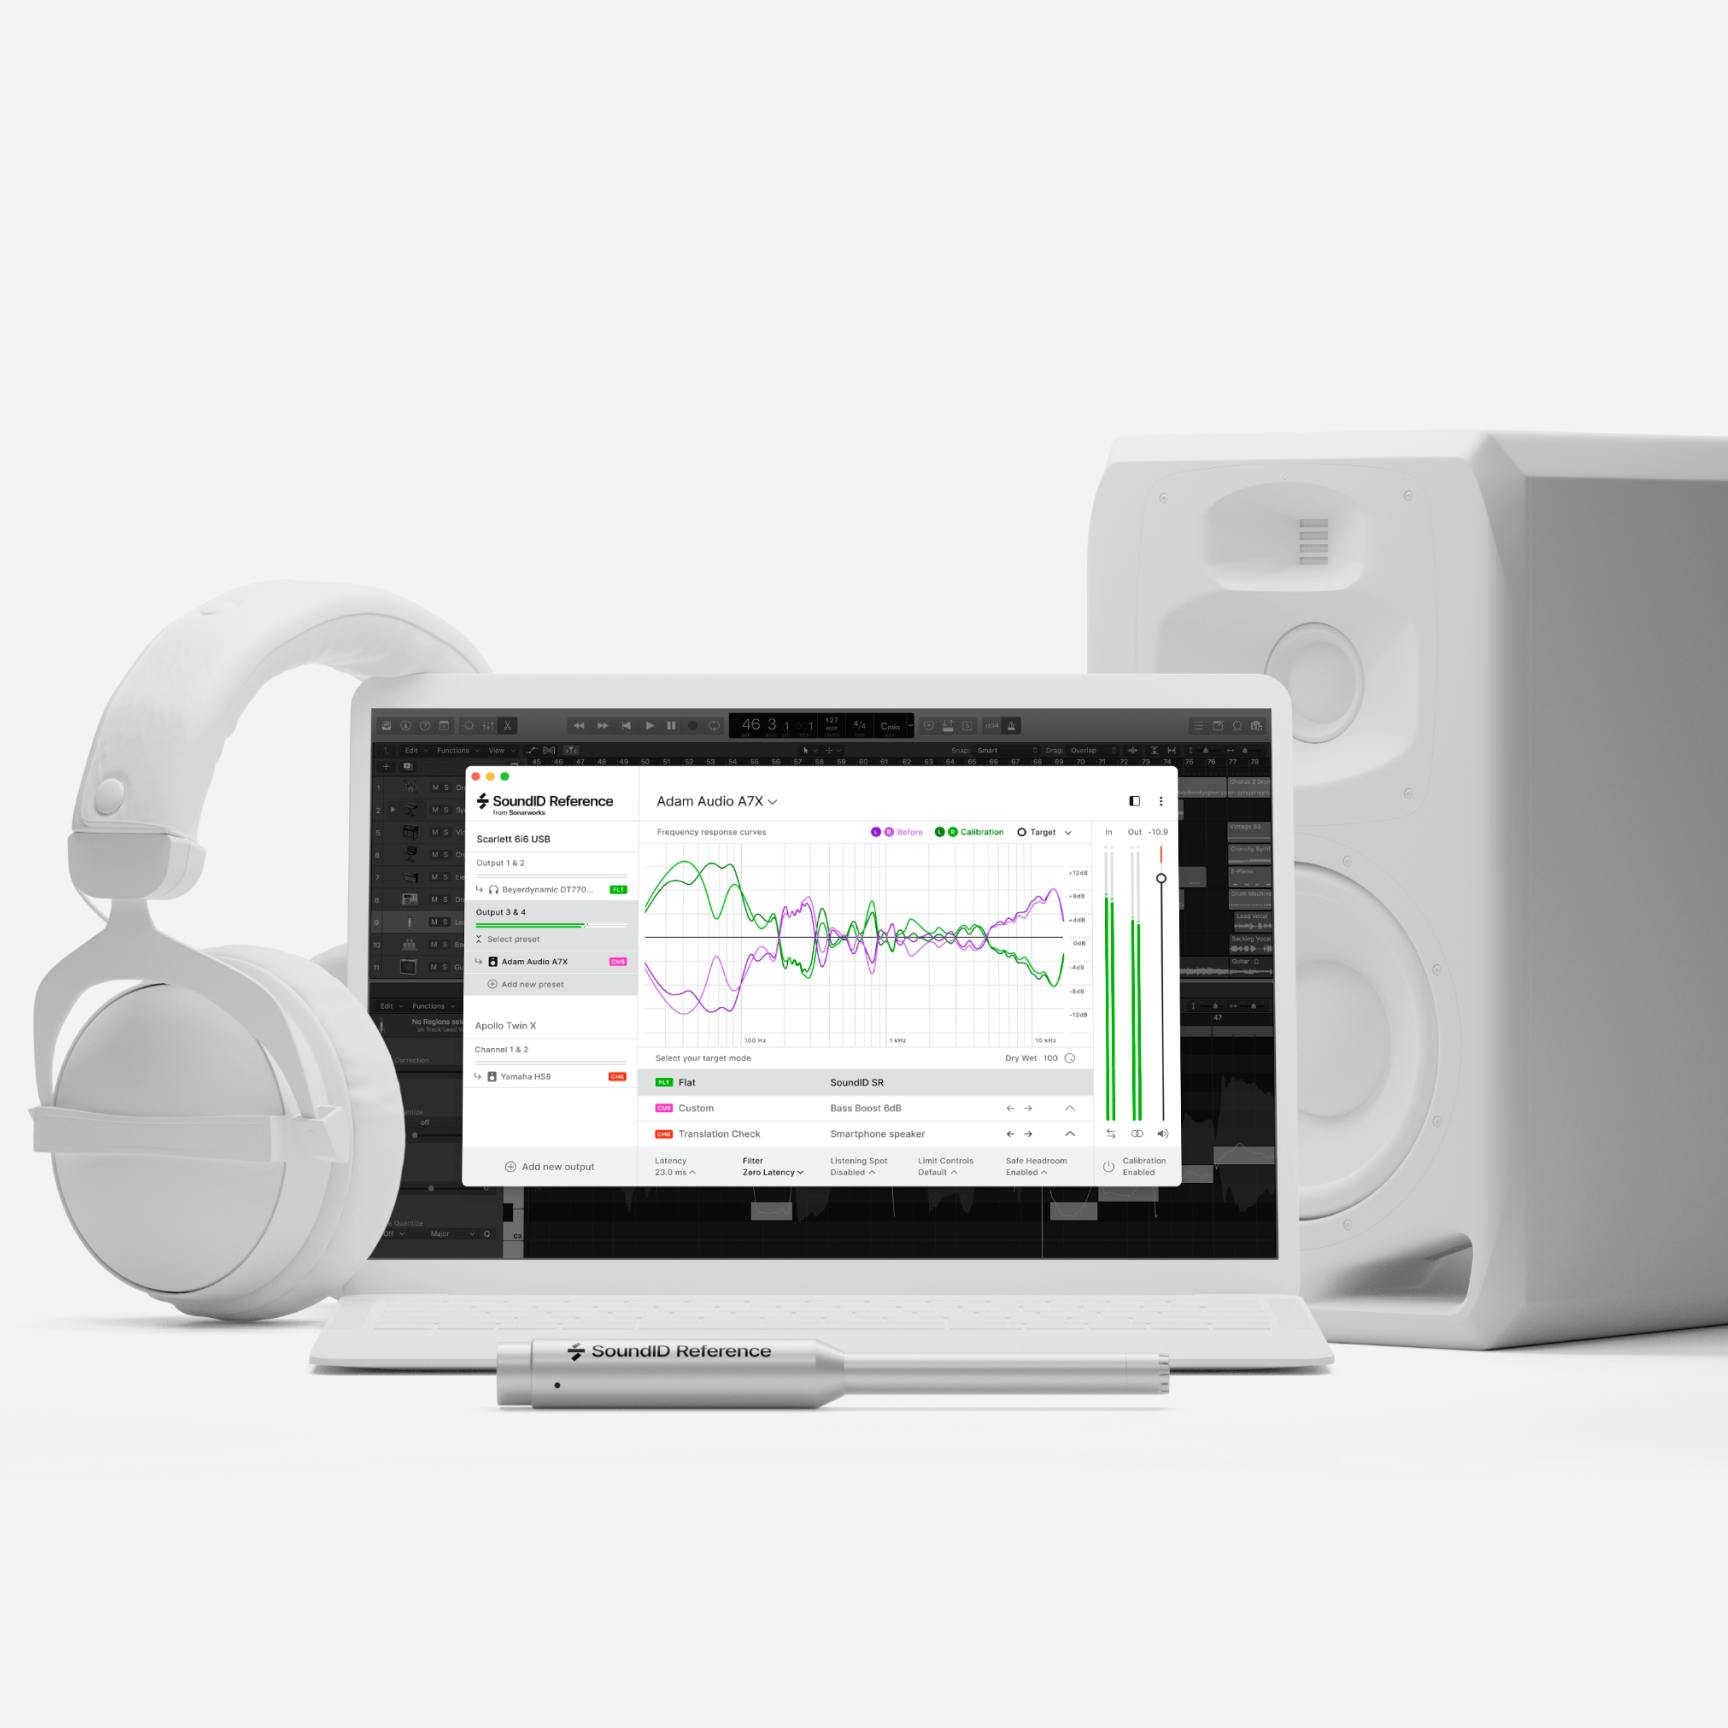 SoundID Reference software, white headphones and speaker